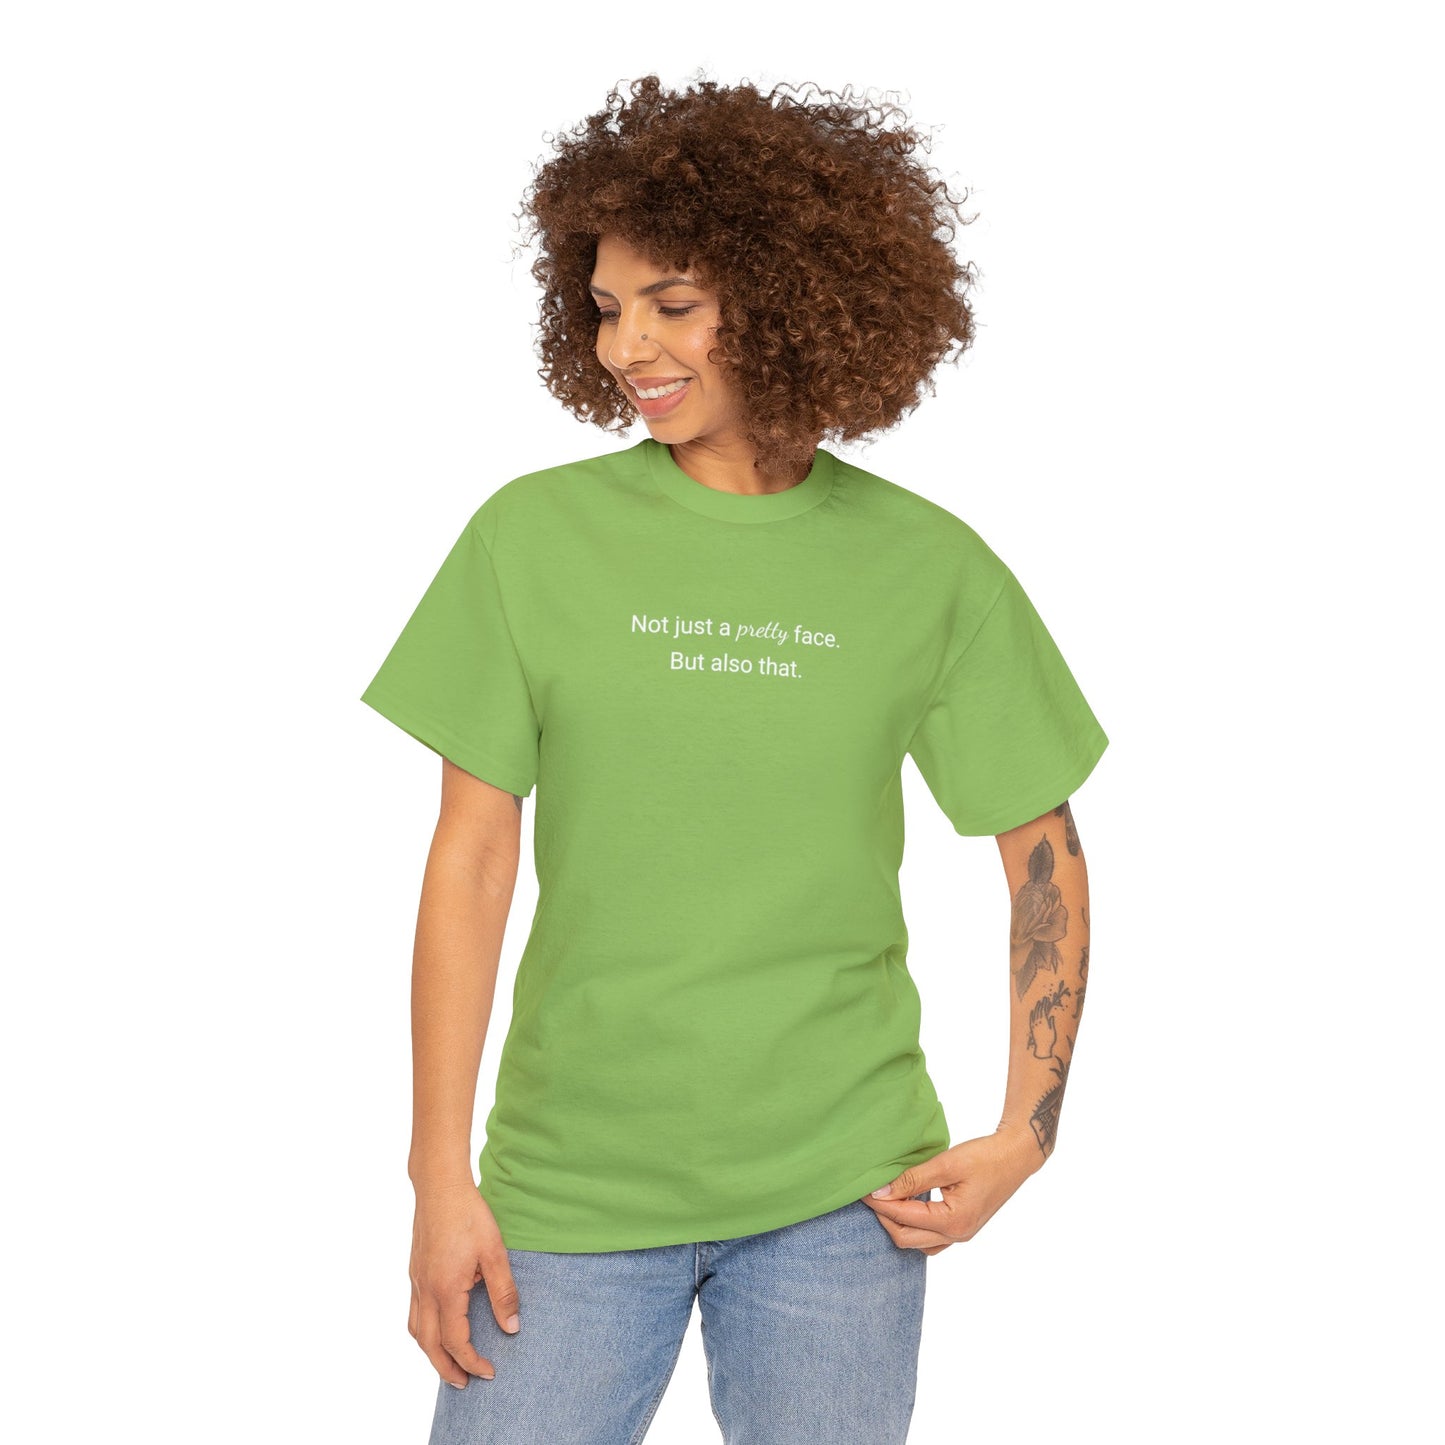 Not Just A Pretty Face - St Patrick's Day T-Shirt